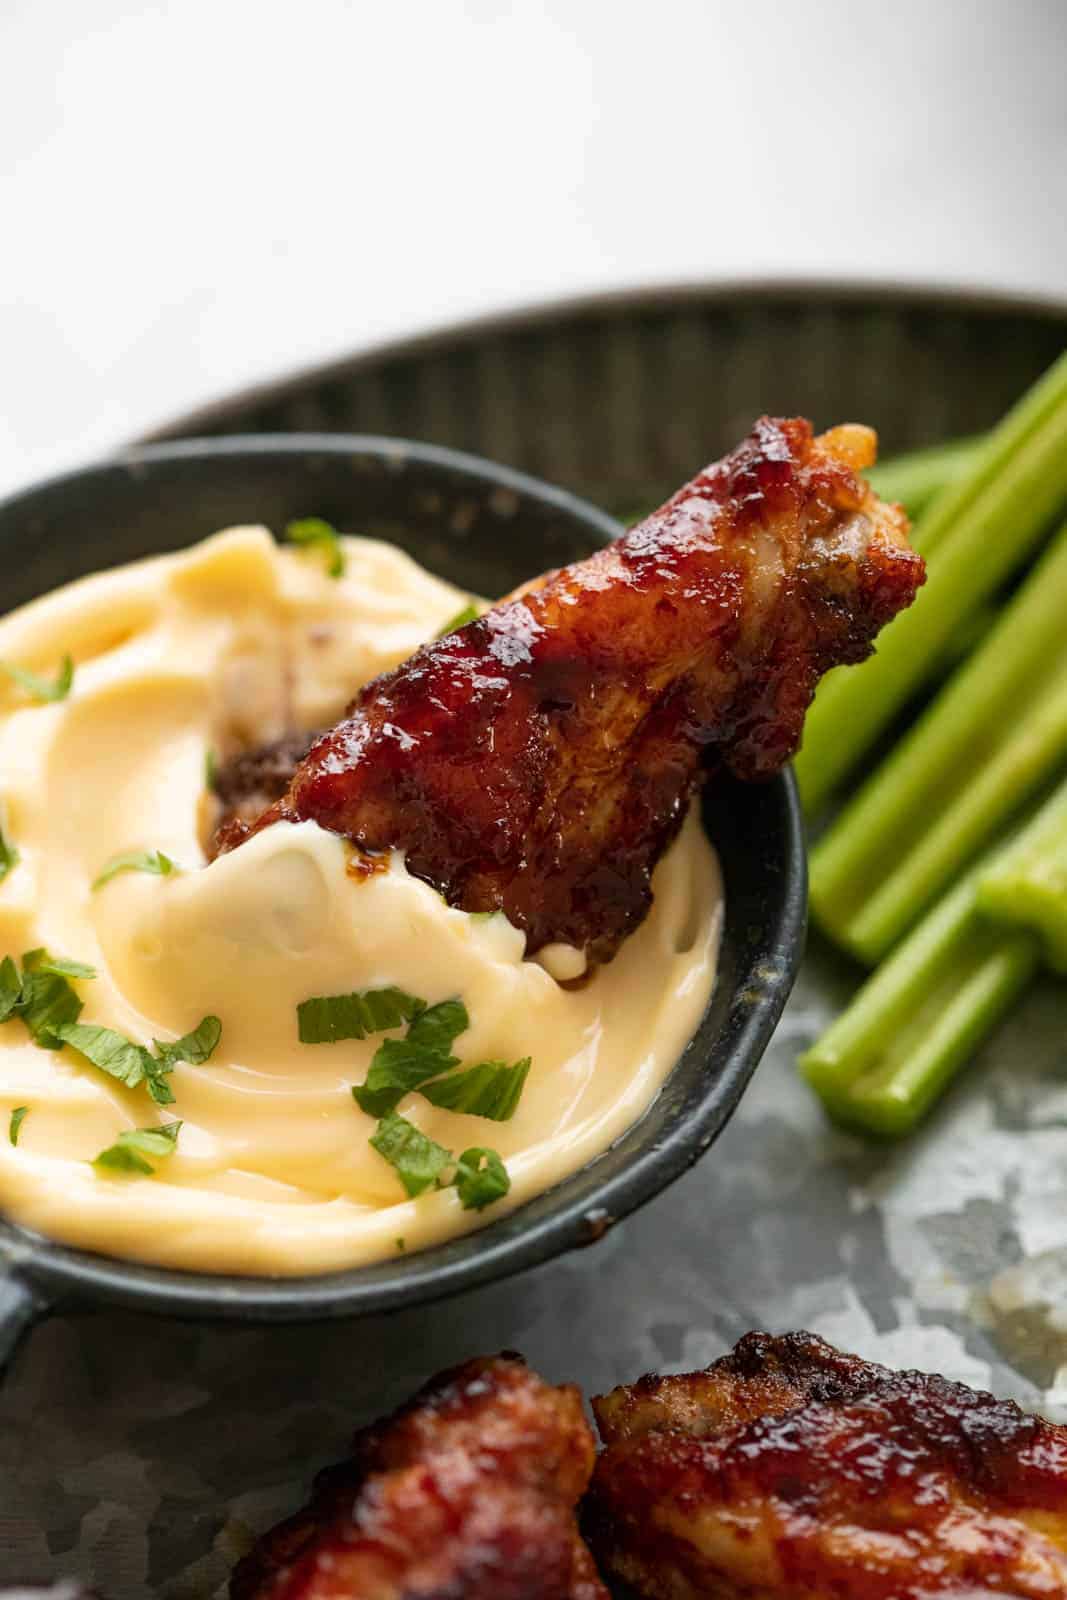 A single chicken wing dipped into aioli